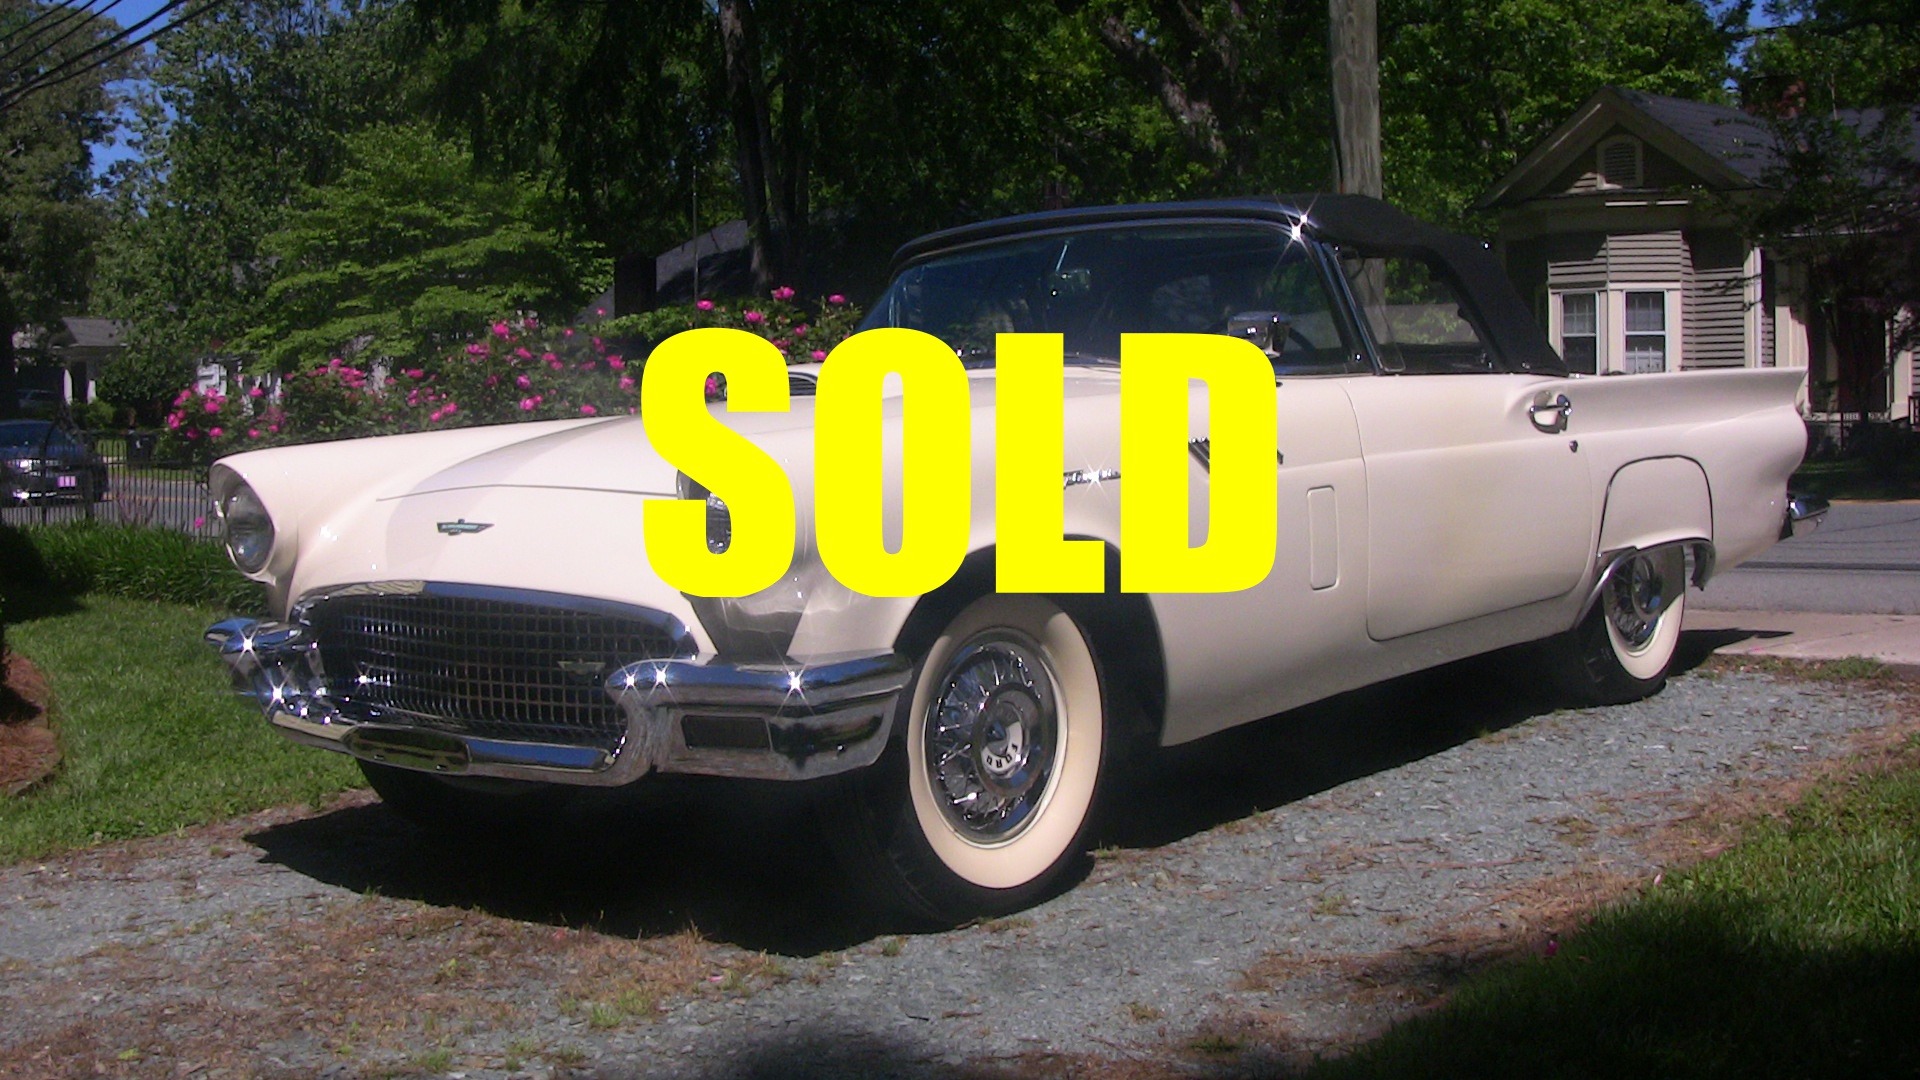 Used 1957 Ford Thunderbird  71 , For Sale $49900, Call Us: (704) 996-3735